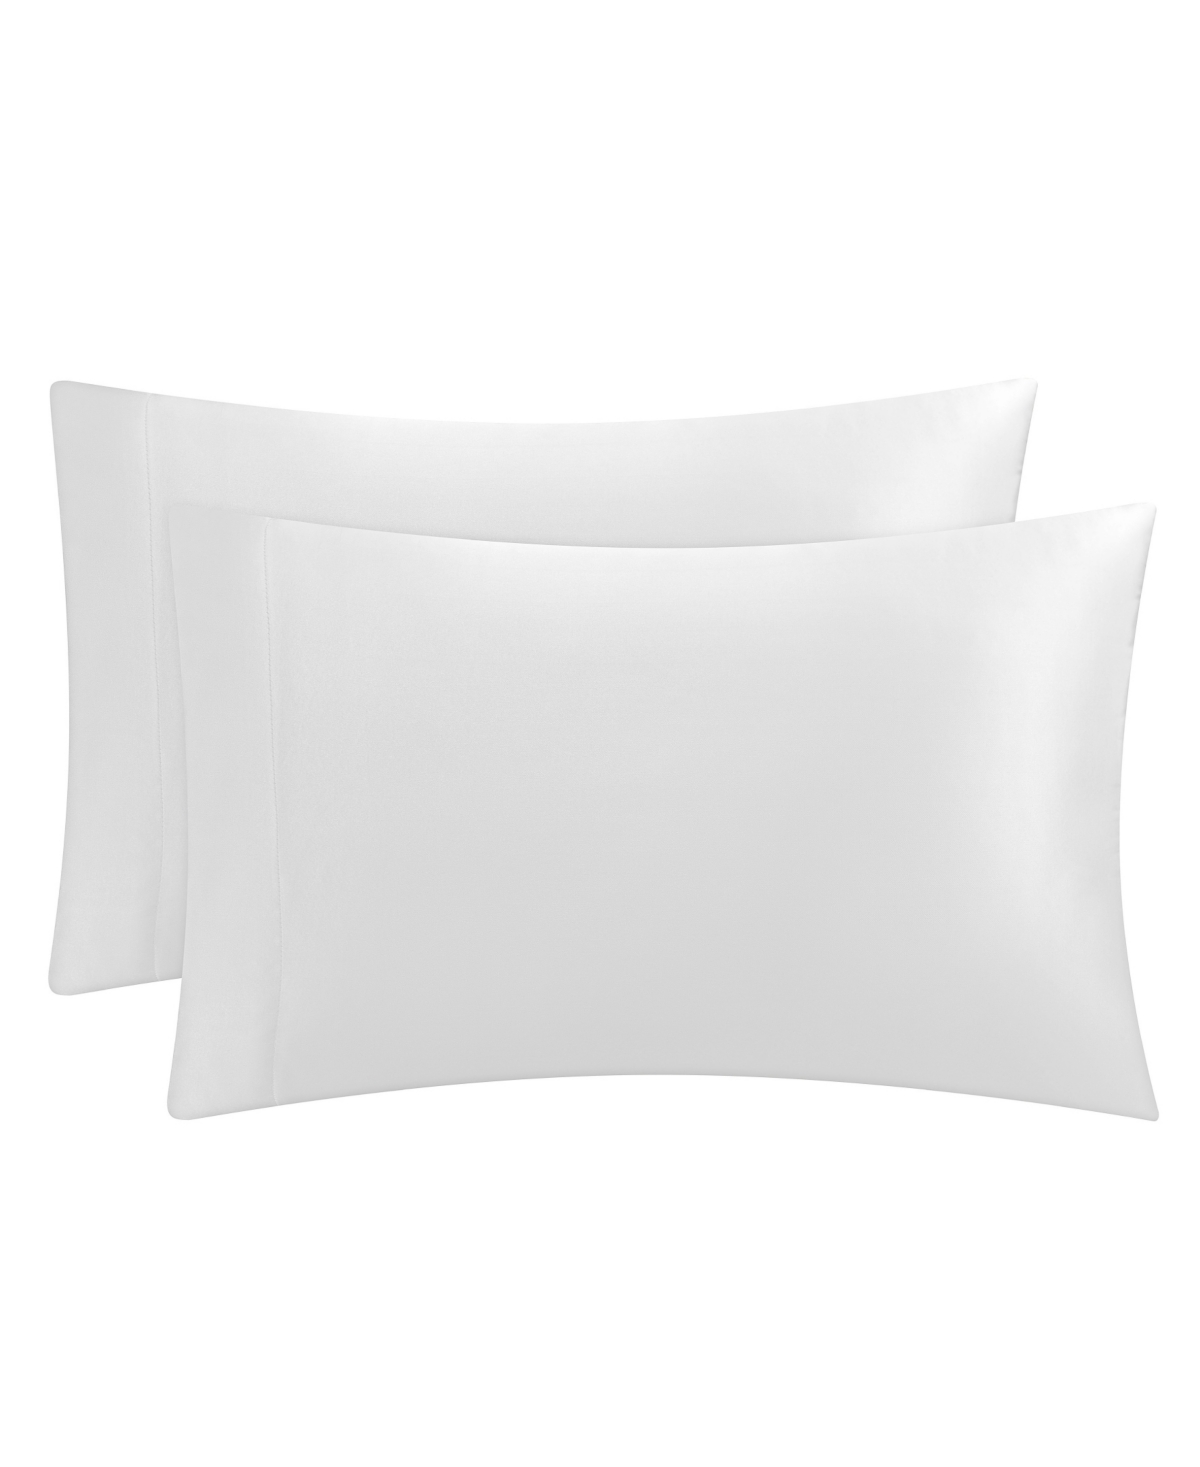 Juicy Couture Satin 2 Piece Pillow Case Set, King In Pure White